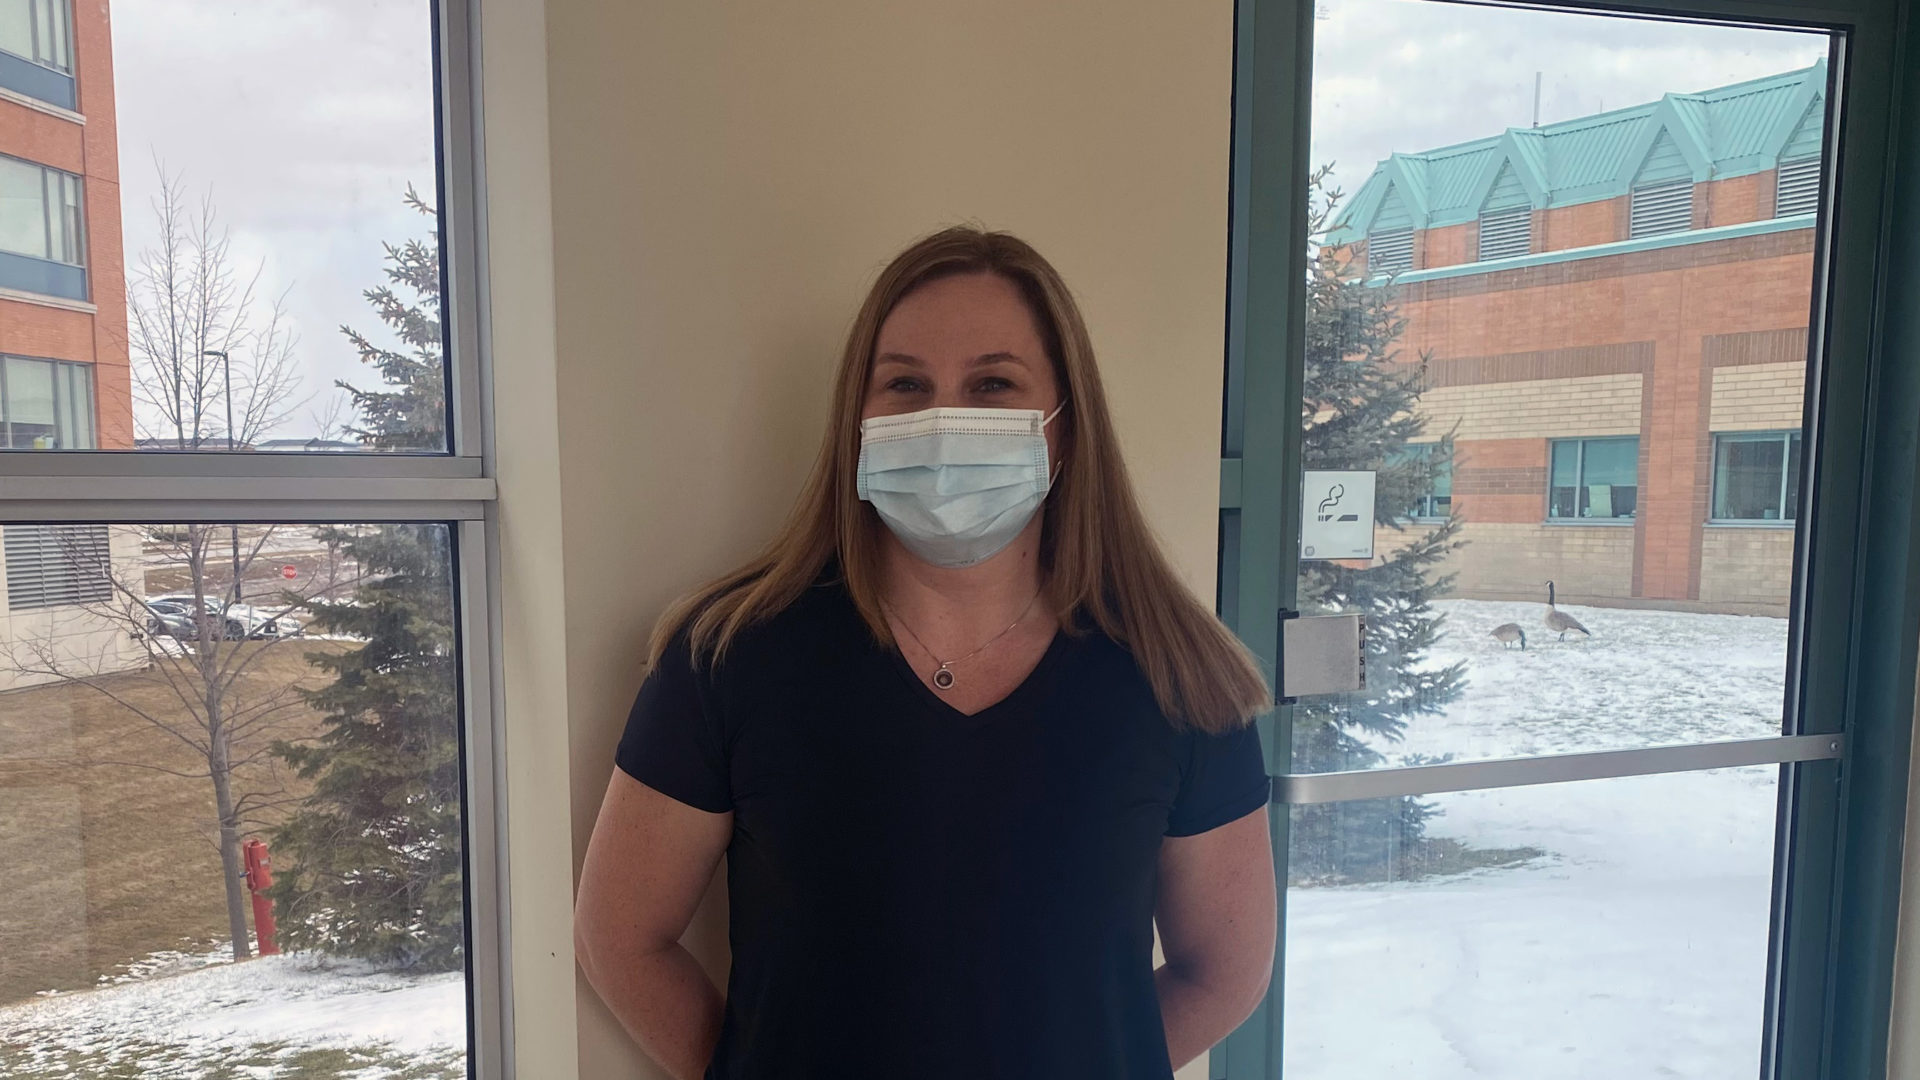 Cindy Stortz, standing against a wall in the hospital, wearing a black shirt, medical mask, and medium length blond hair